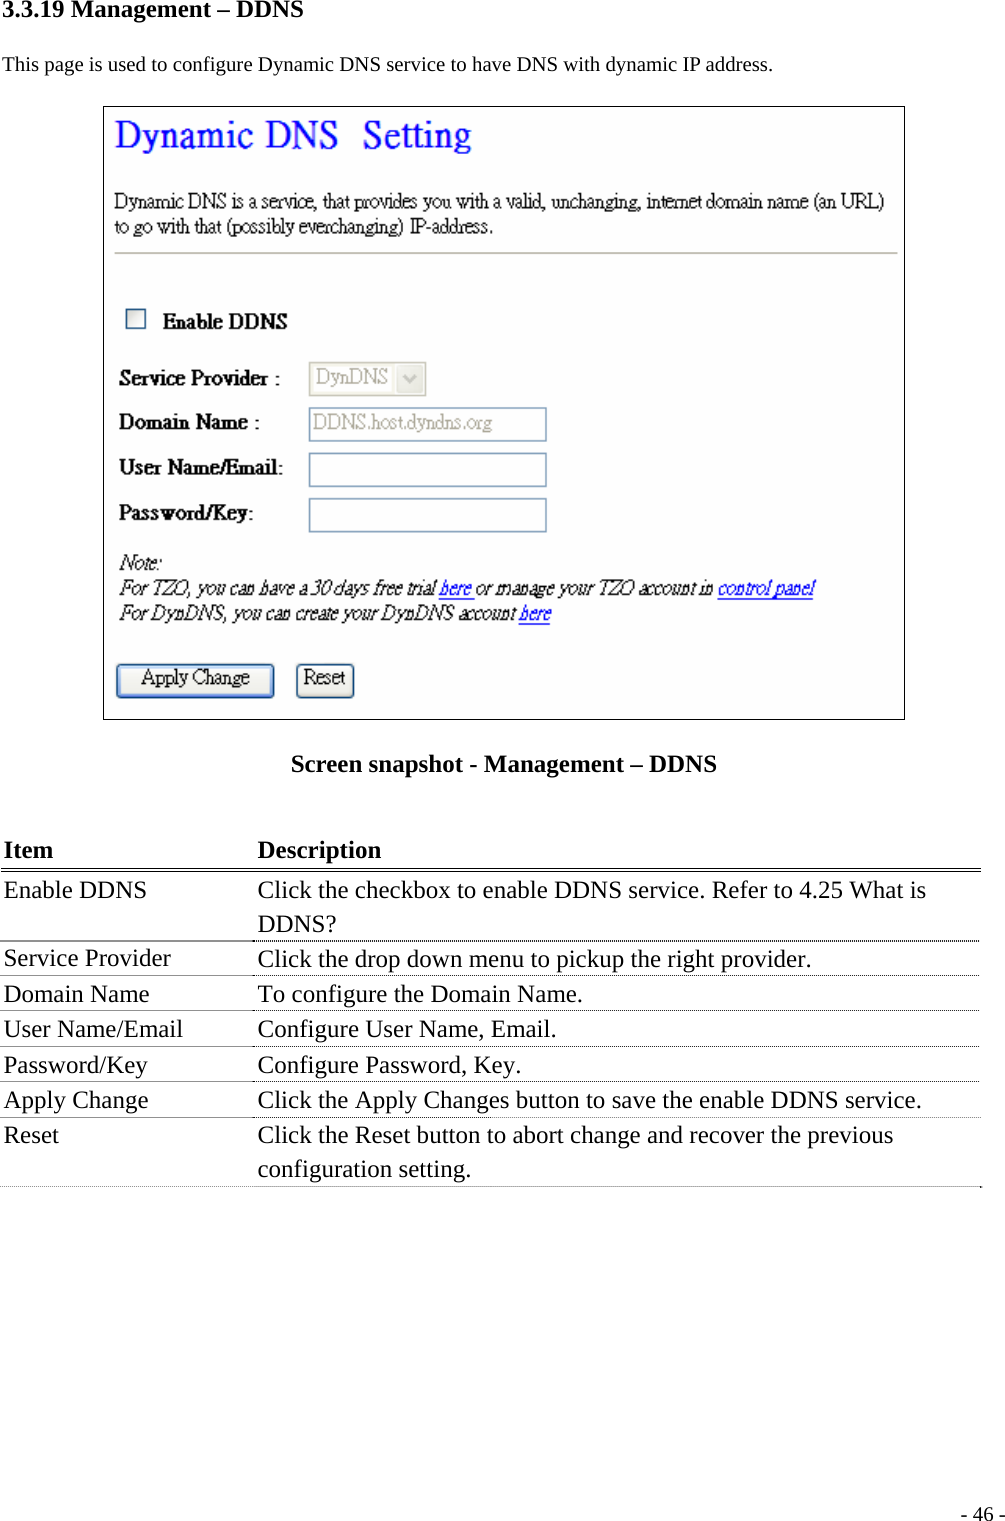 3.3.19 Management – DDNS This page is used to configure Dynamic DNS service to have DNS with dynamic IP address.  Screen snapshot - Management – DDNS  Item Description Enable DDNS  Click the checkbox to enable DDNS service. Refer to 4.25 What is DDNS? Service Provider    Click the drop down menu to pickup the right provider. Domain Name    To configure the Domain Name. User Name/Email  Configure User Name, Email. Password/Key   Configure Password, Key. Apply Change  Click the Apply Changes button to save the enable DDNS service. Reset  Click the Reset button to abort change and recover the previous configuration setting.   - 46 -